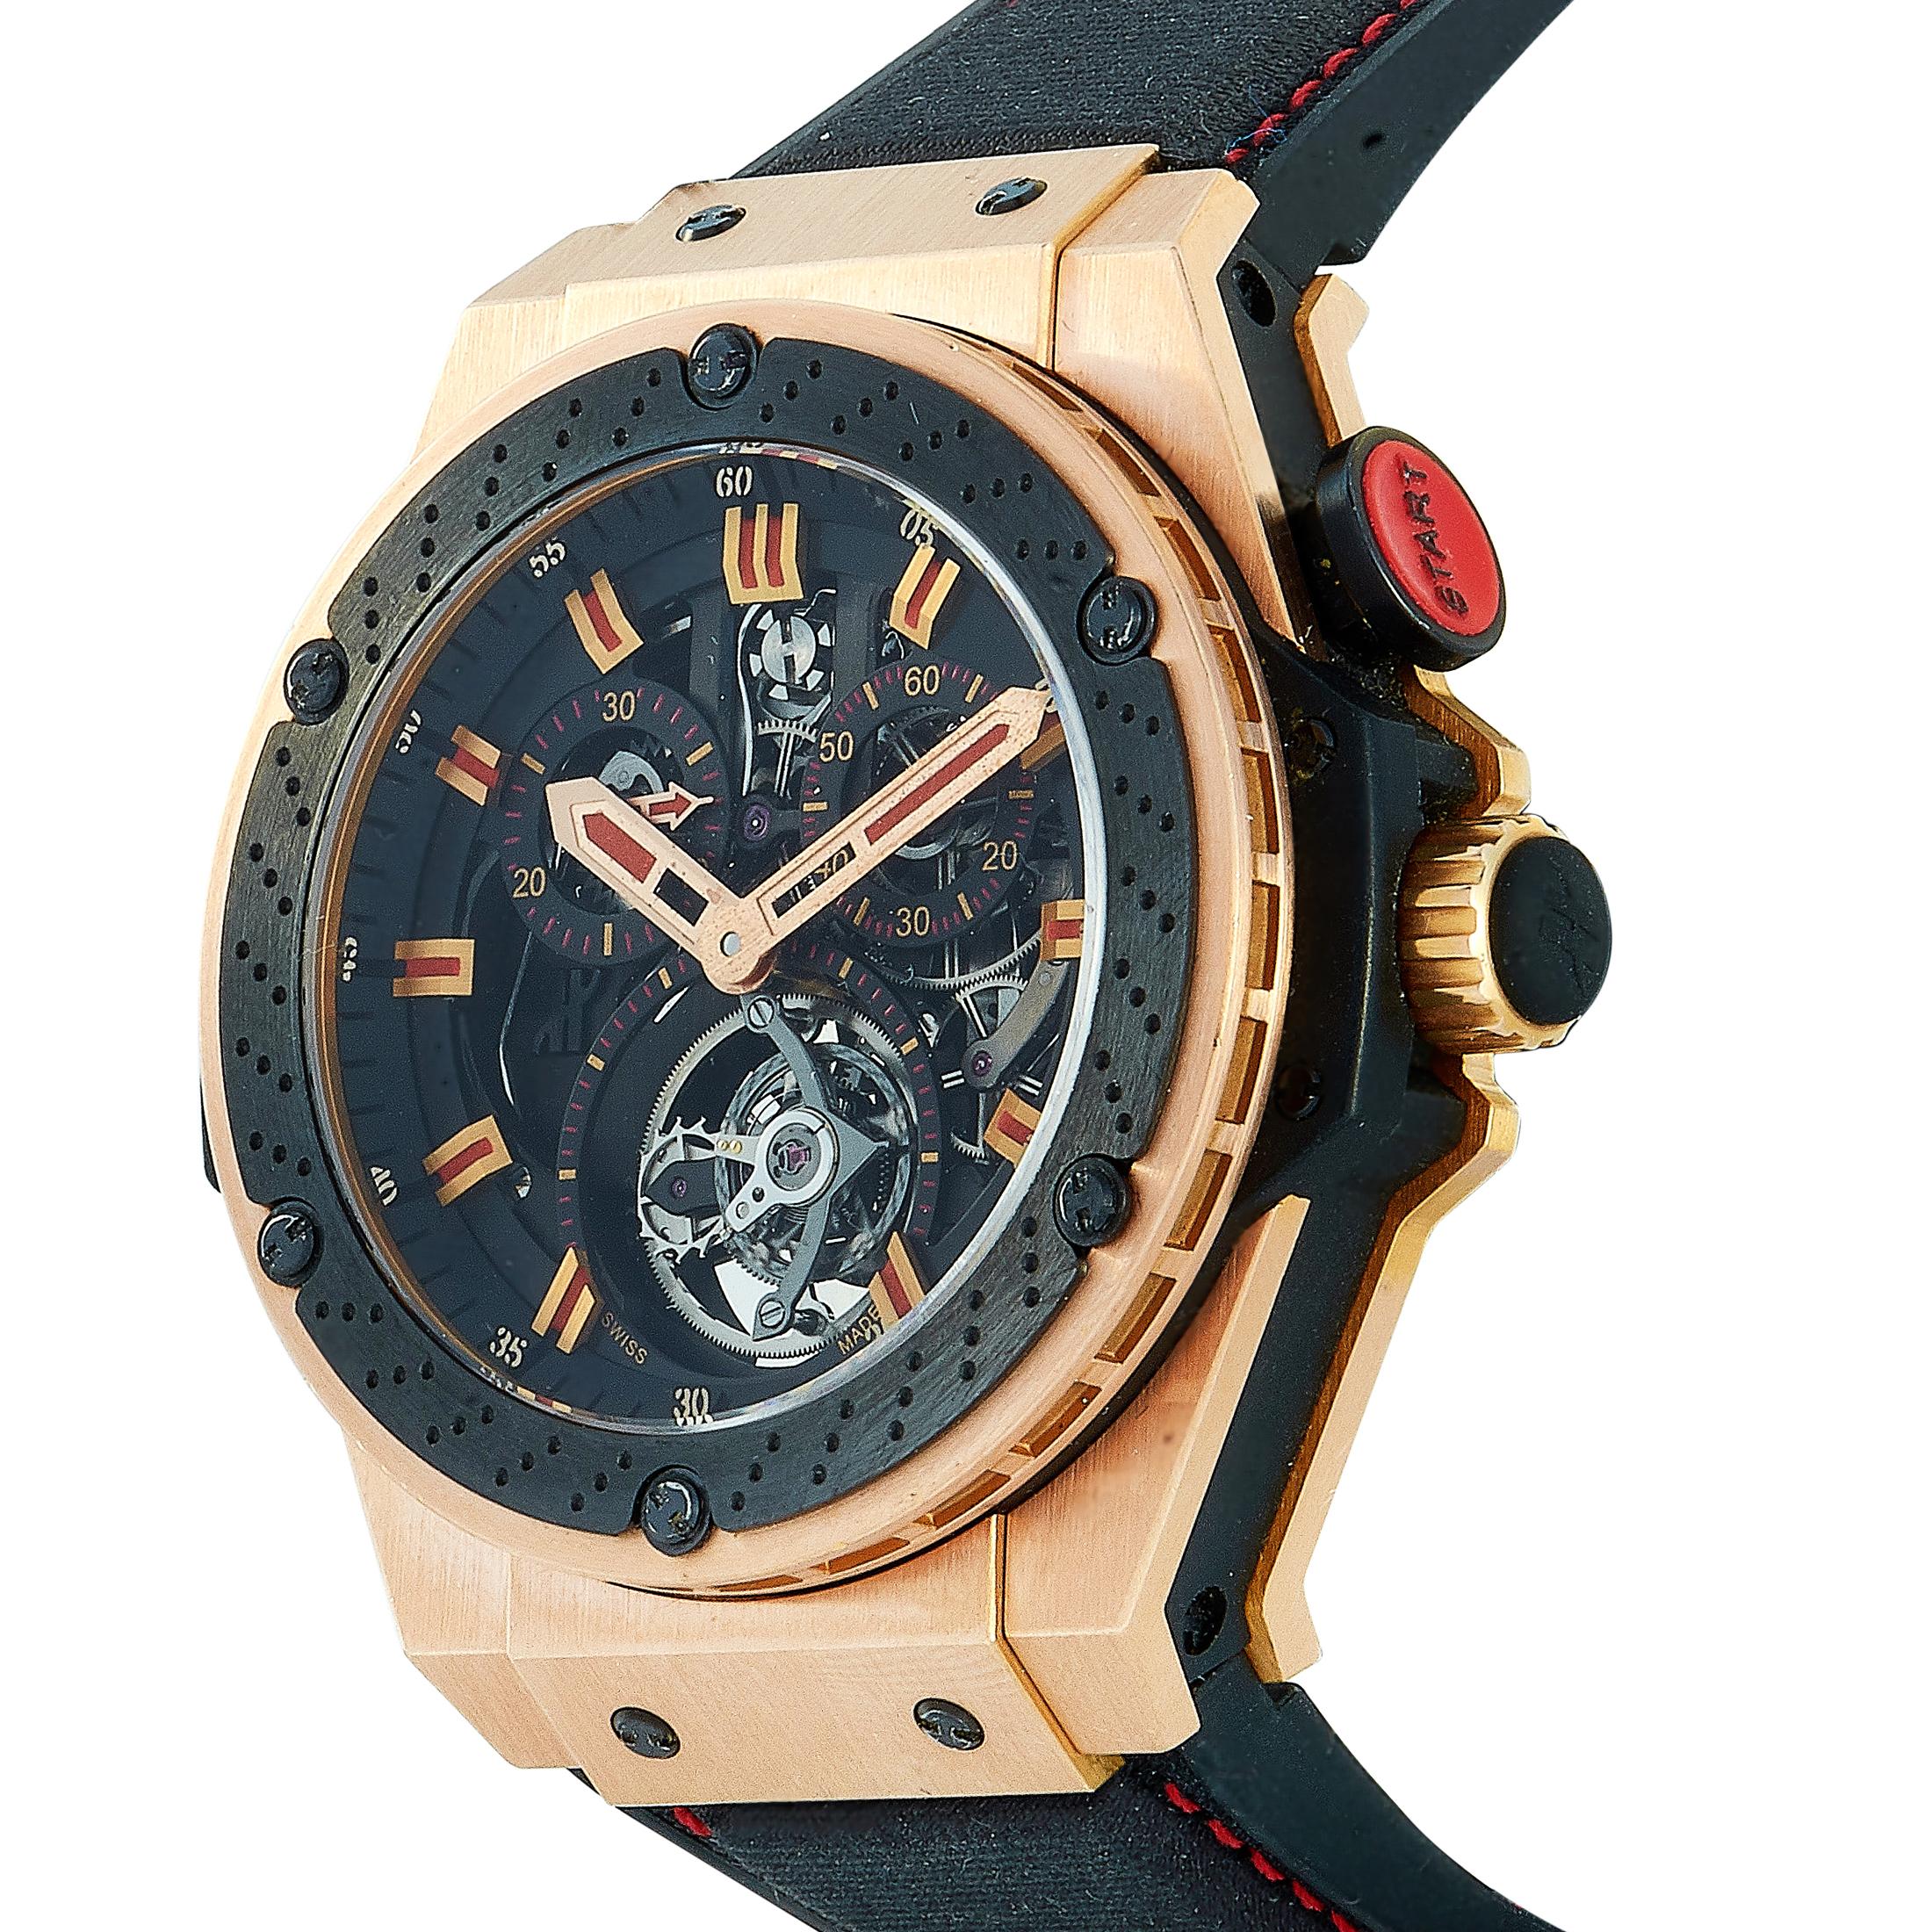 The Hublot Big Bang King Power Tourbillon F1 watch, reference number 707.OM.1138.NR.FMO10, is presented within the superb “Big Bang” collection in an edition limited to only 50 pieces.

This model is equipped with the HUB 7300 hand-wound movement